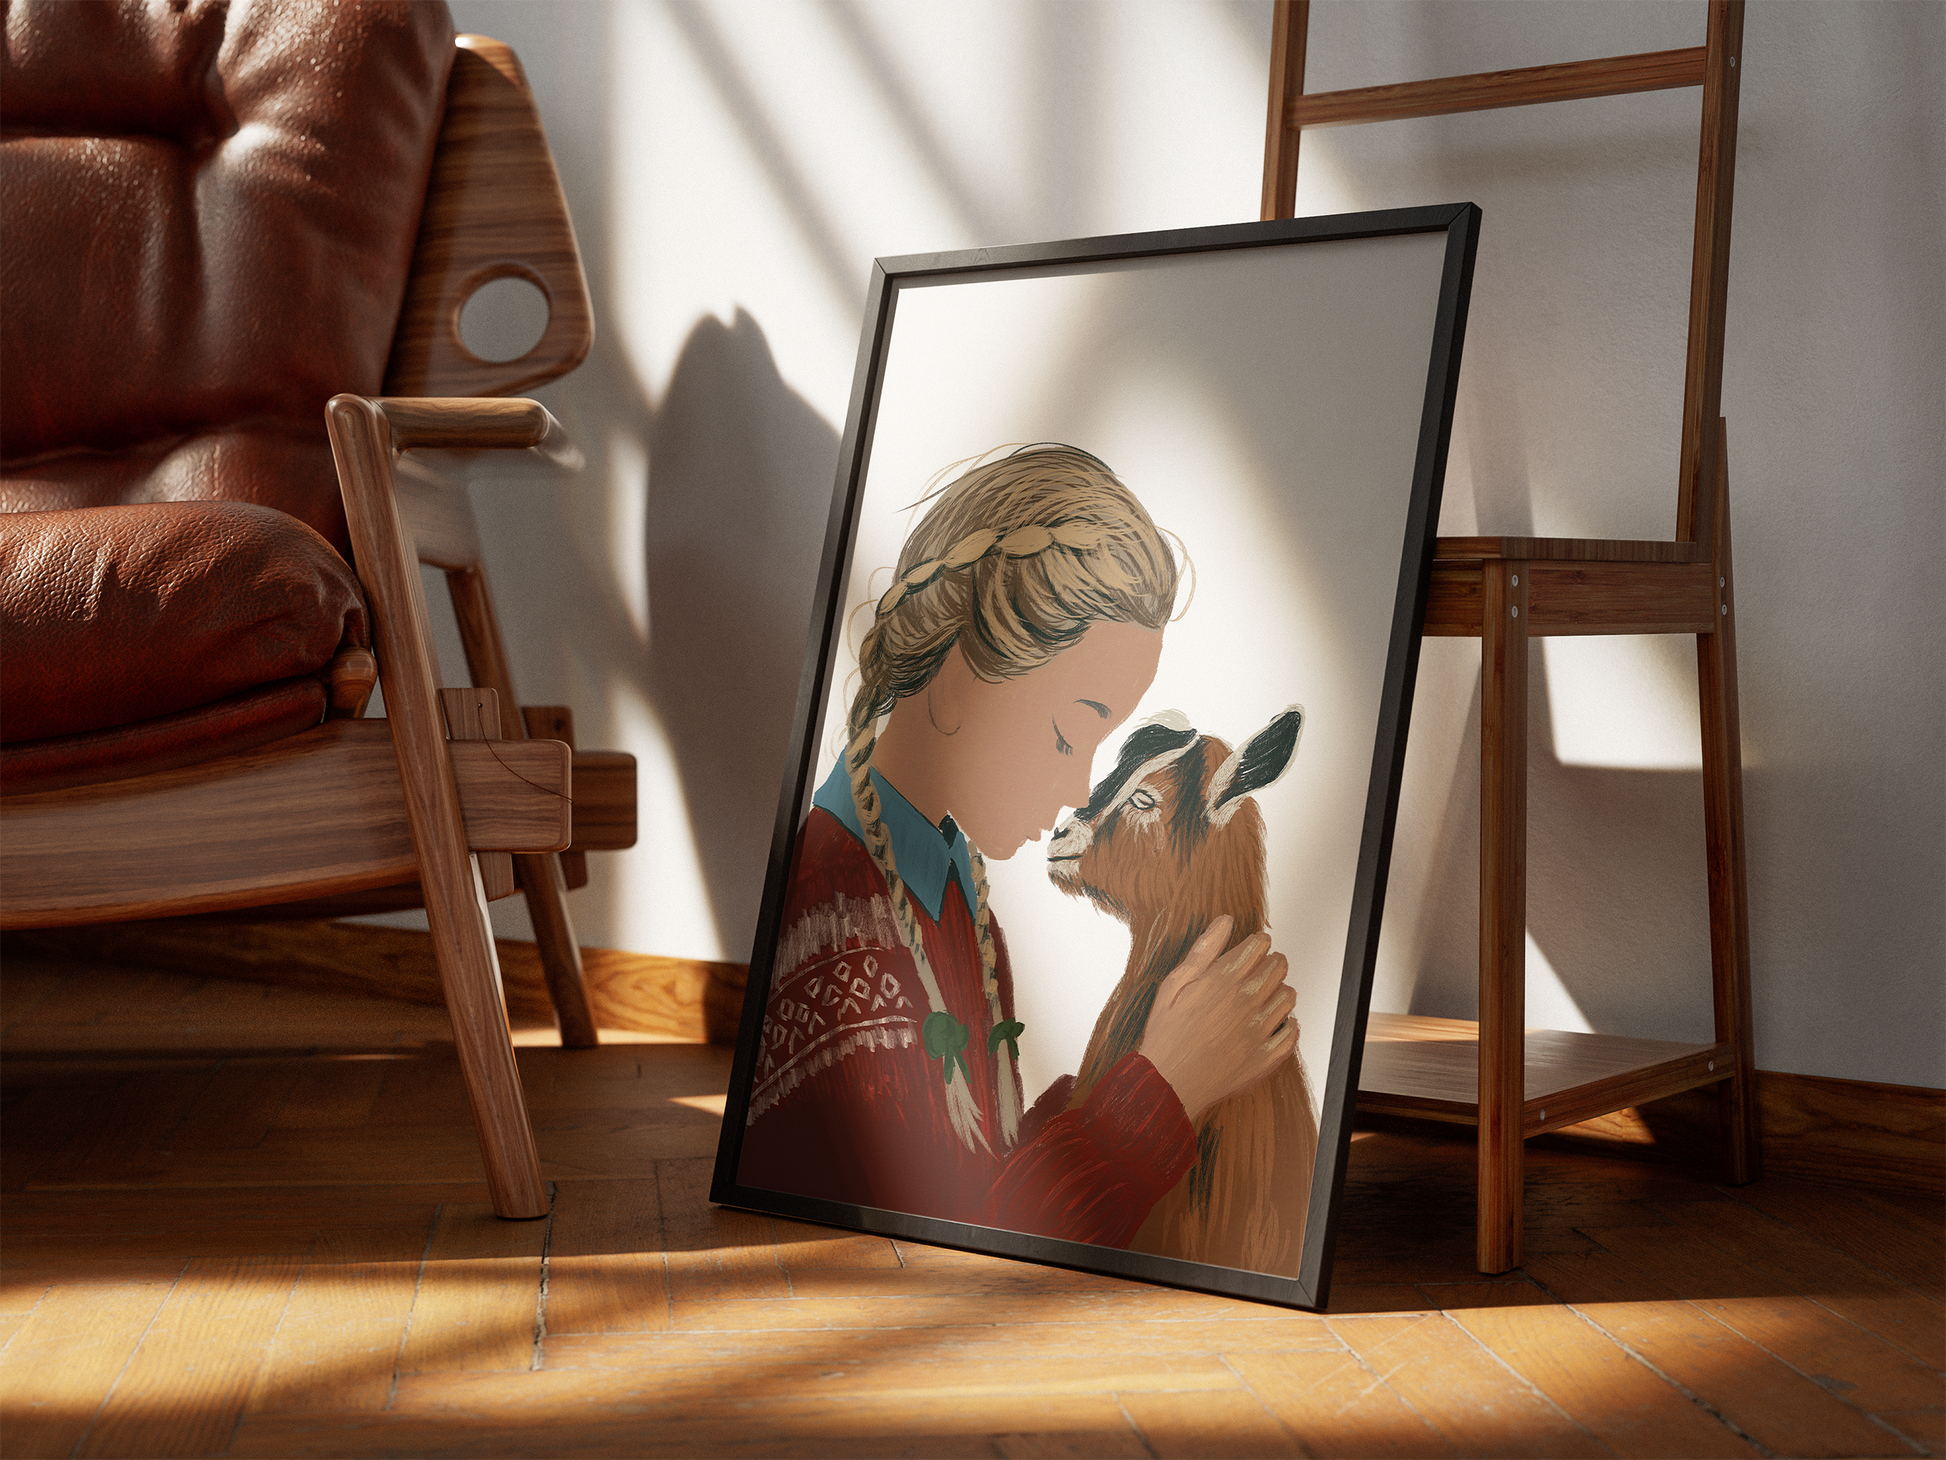 A printable digital painting of a girl in a red sweater holding a baby goat, creating a focal point in a well-lit corner with a stylish wooden chair and ladder shelf